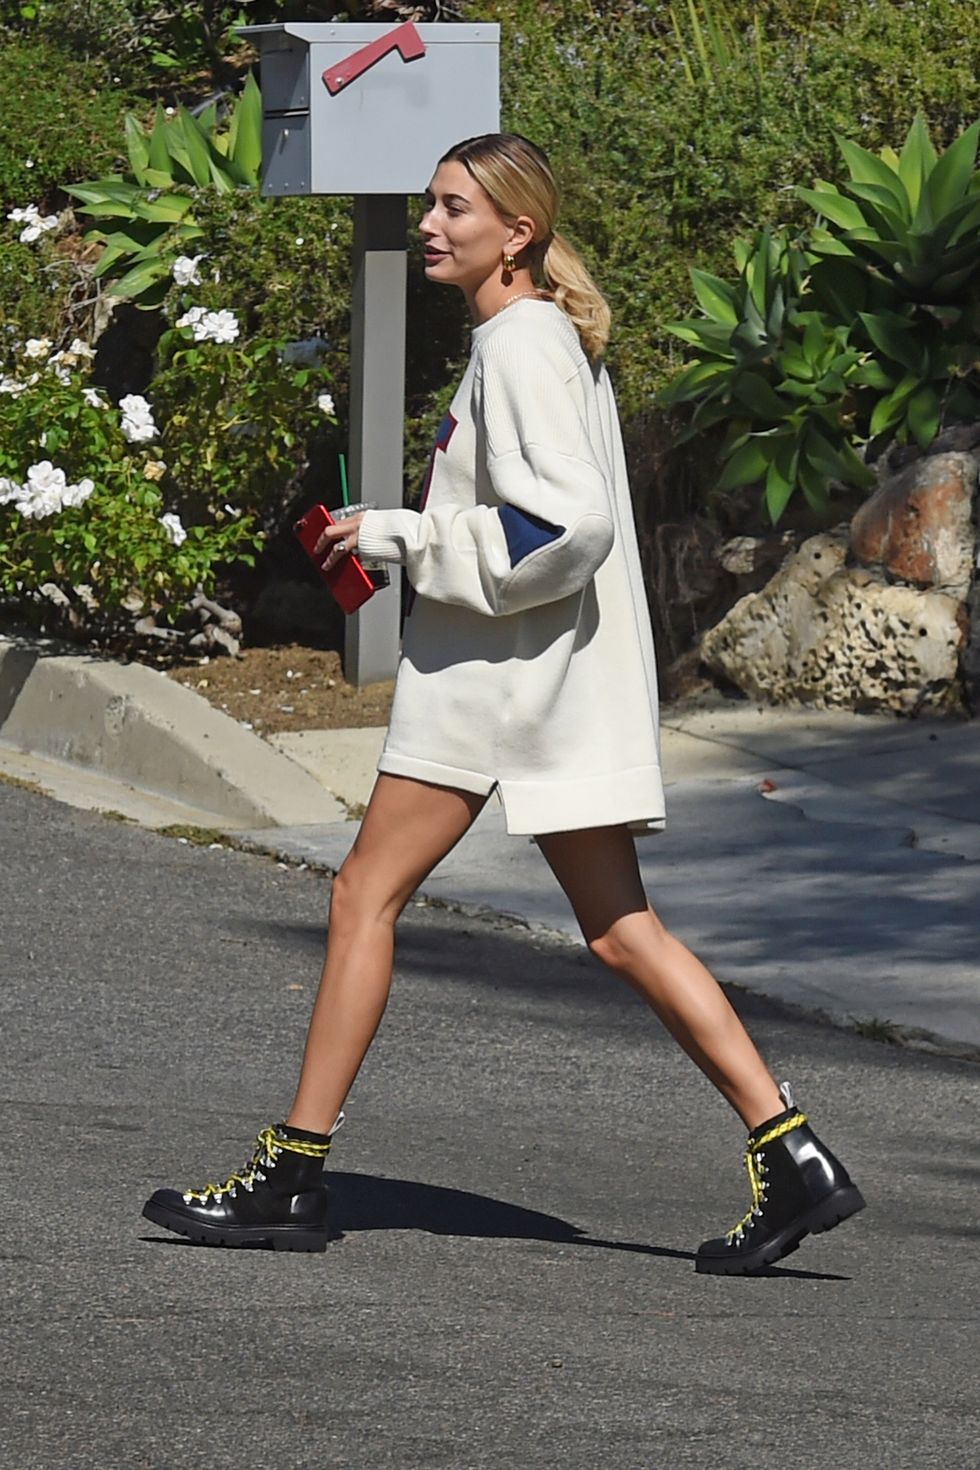 hailey baldwin is seen leaving pastor carl lentz home one day after selena gomez has a mental breakdown in los angeles 11 oct 2018 pictured hailey baldwin photo credit rachpootmega themegaagencycom 1 888 505 6342